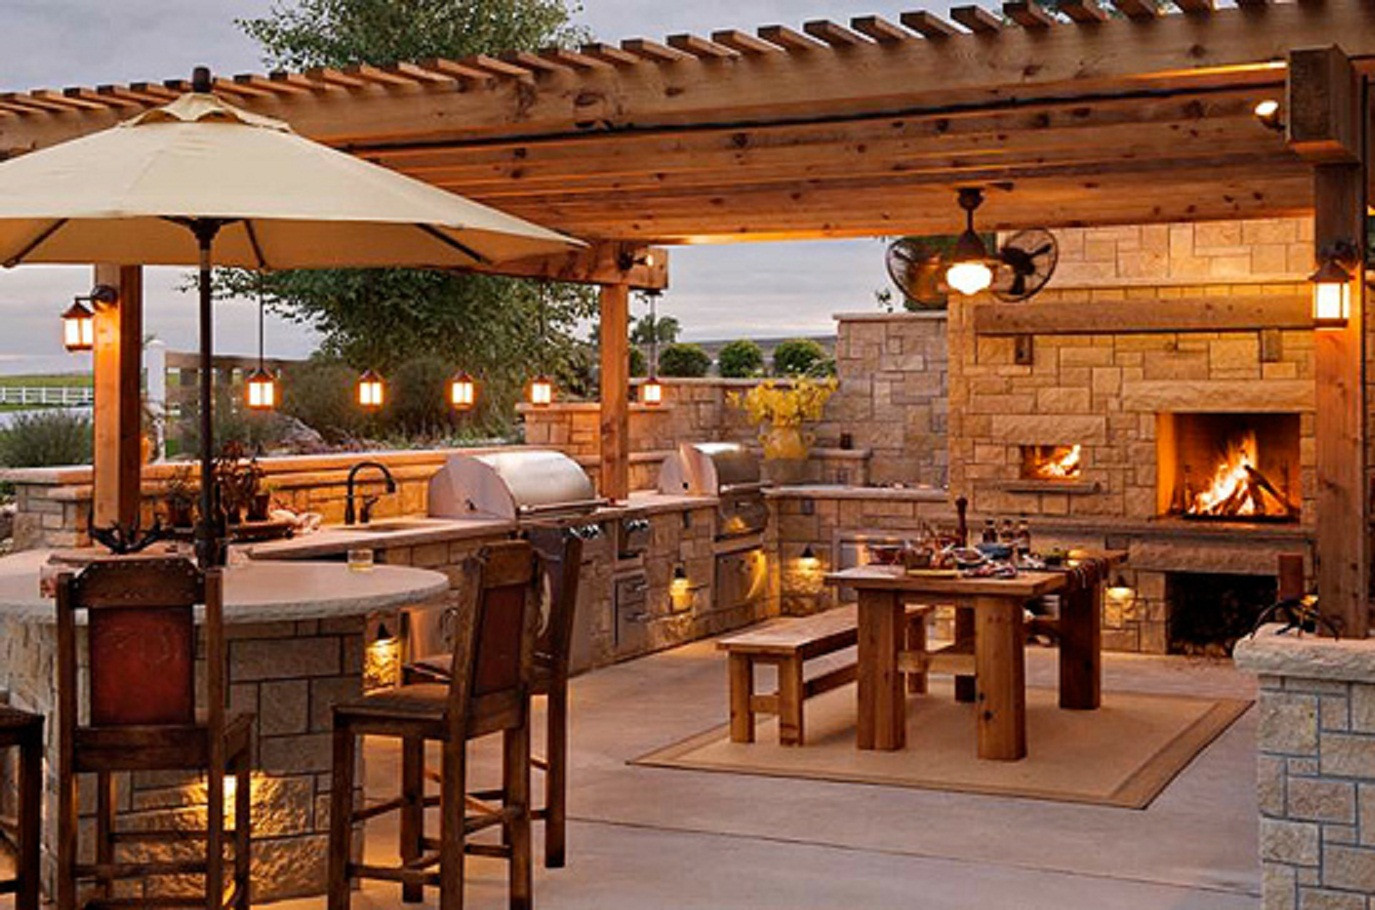 Outdoor Patio Kitchen Ideas
 How to Design Your Perfect Outdoor kitchen Outdoor